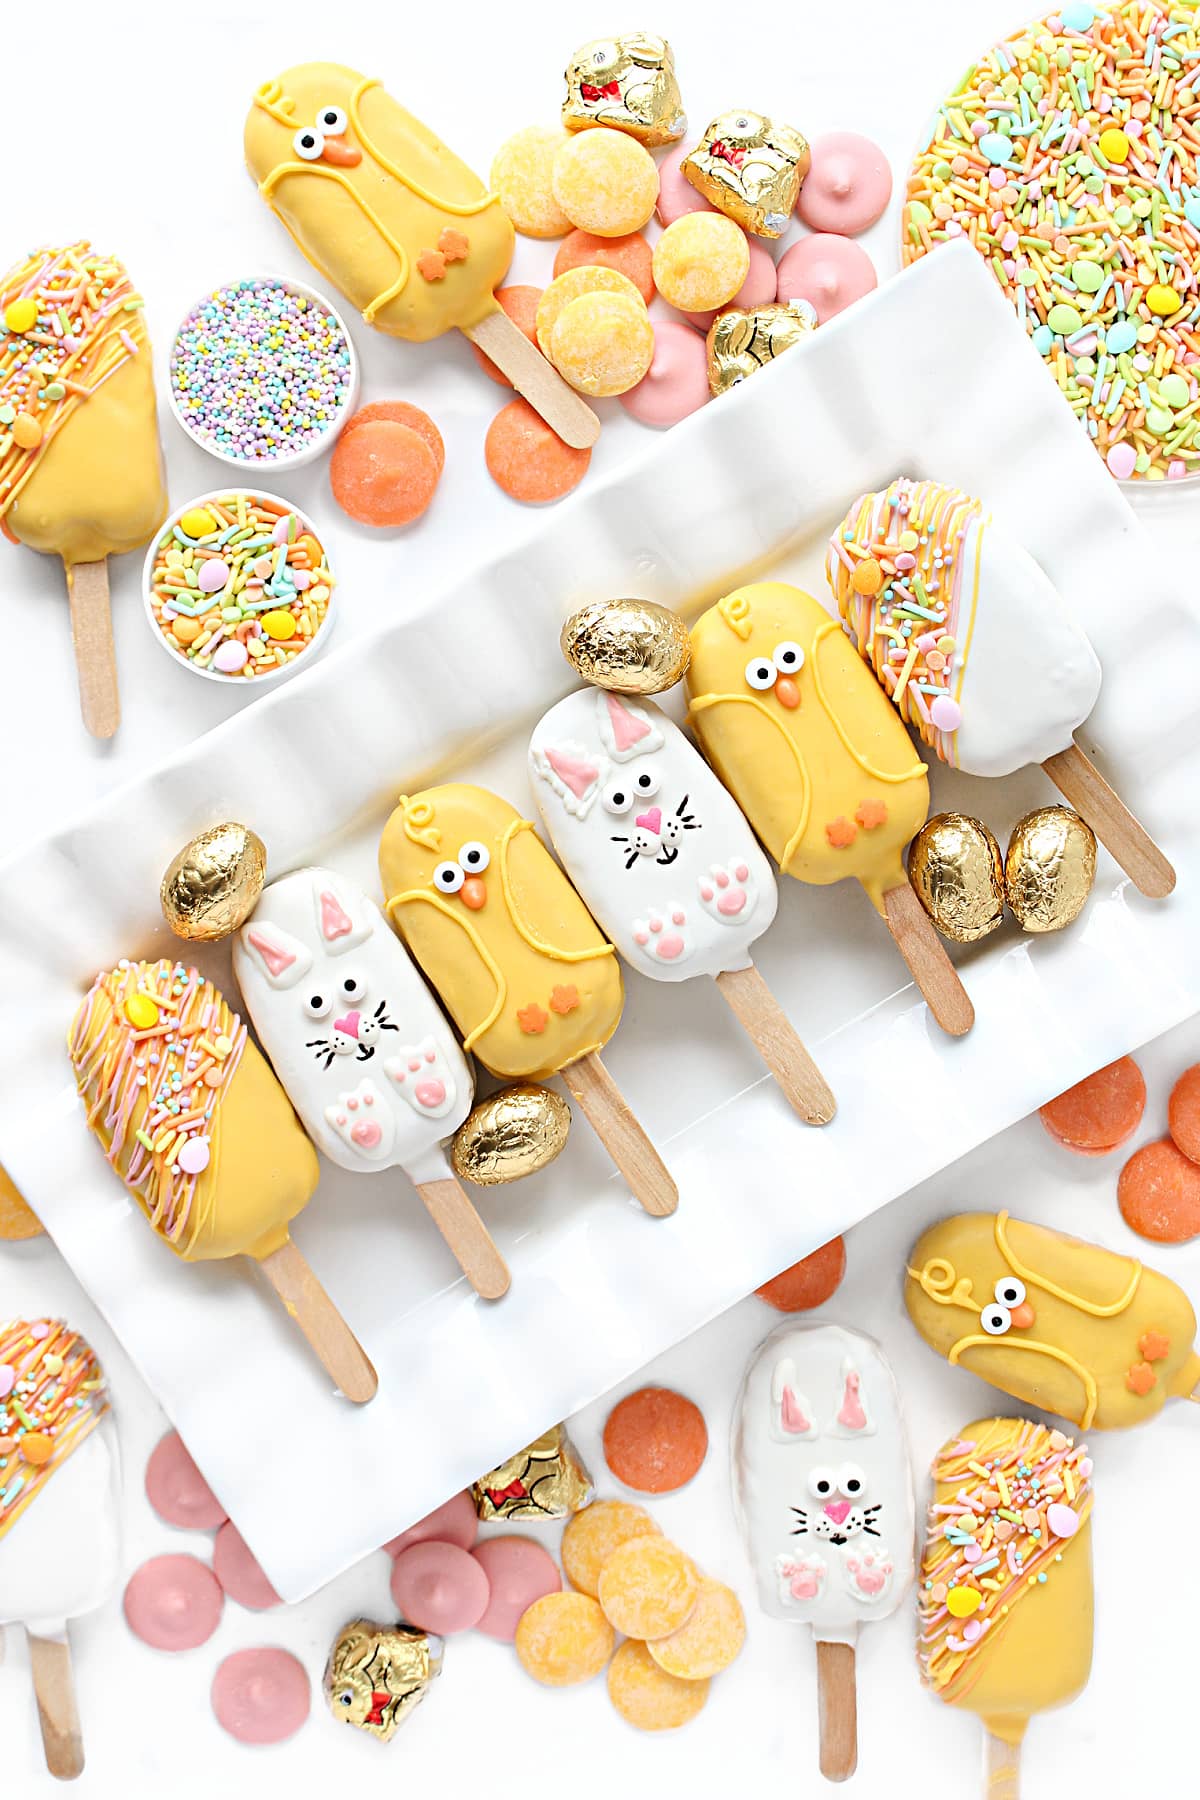 Peanut Chews pops coated in candy melts and decorated like chicks and bunnies for Easter.